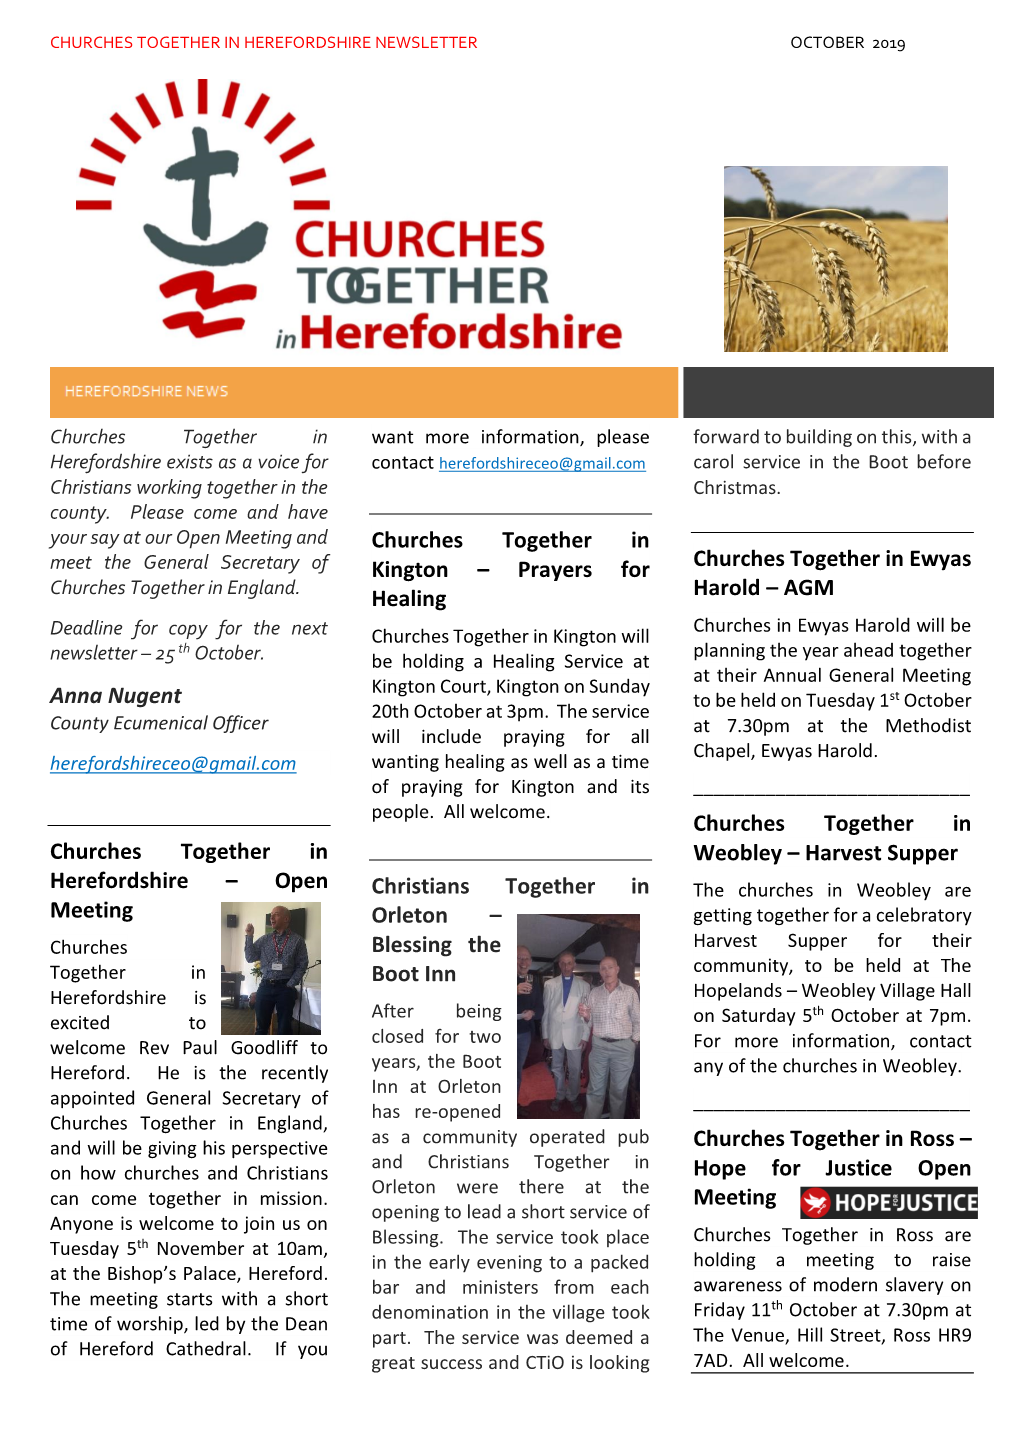 Anna Nugent Churches Together in Herefordshire – Open Meeting